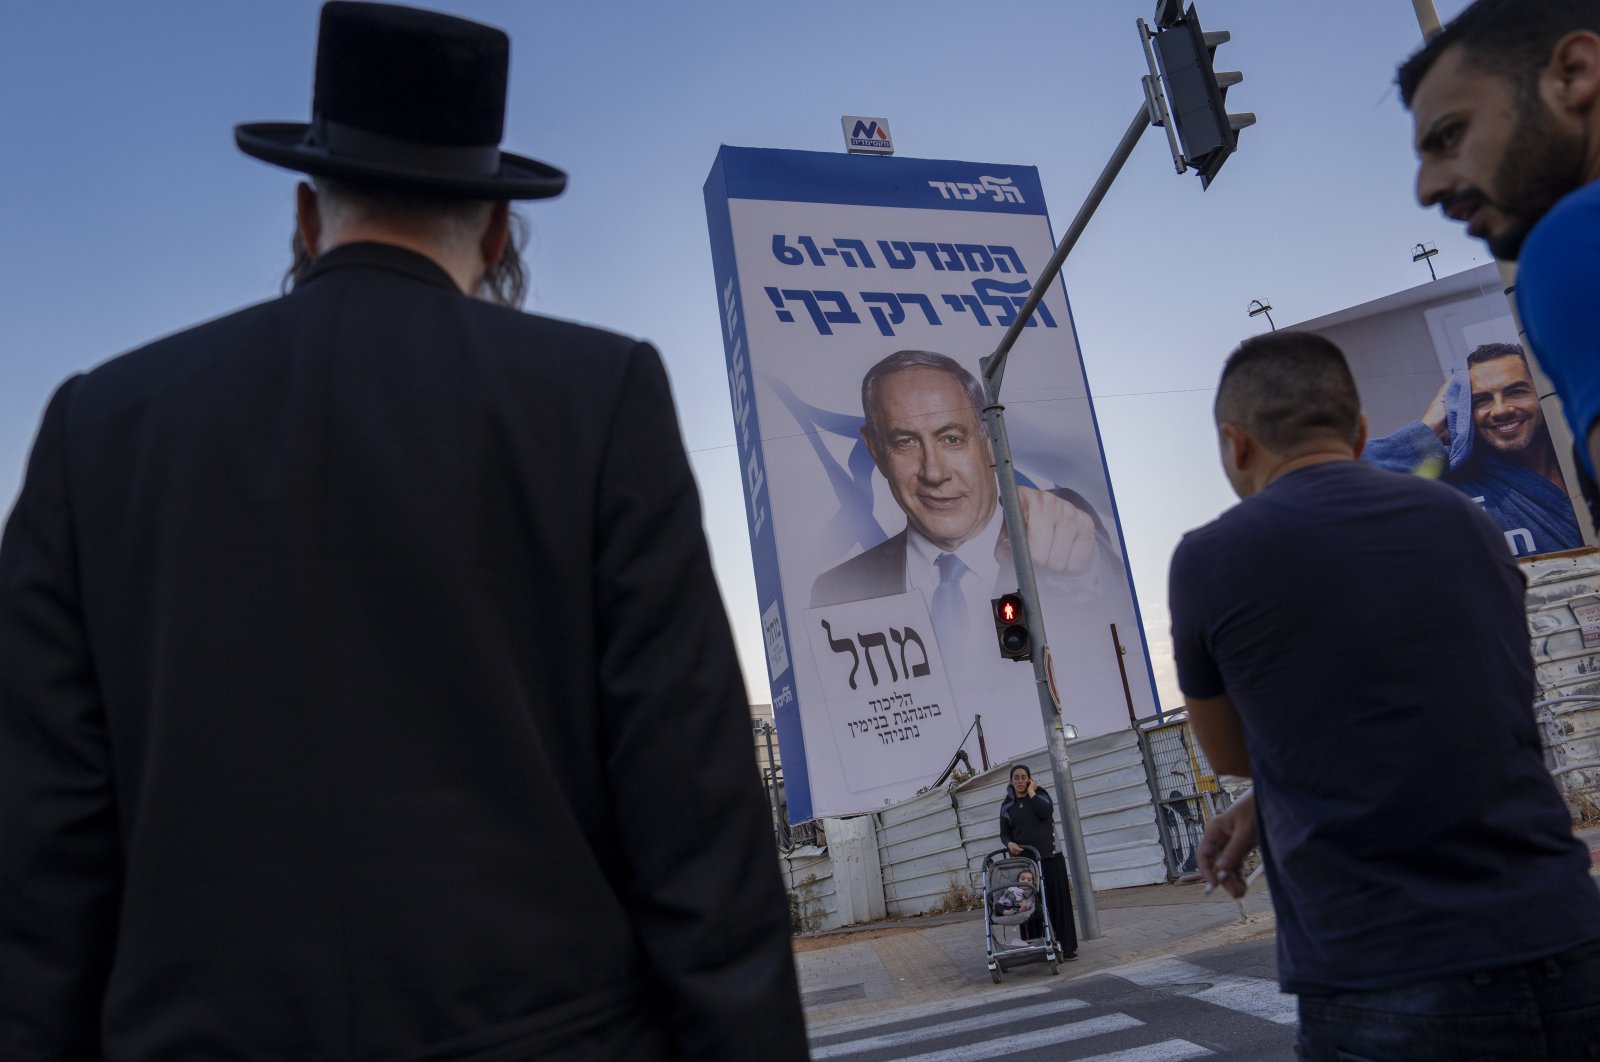 People walk past an election campaign billboard showing Benjamin Netanyahu, former Israeli Prime Minister and the head of Likud party, in Bnei Brak, Israel, Oct. 25, 2022. (AP Photo)